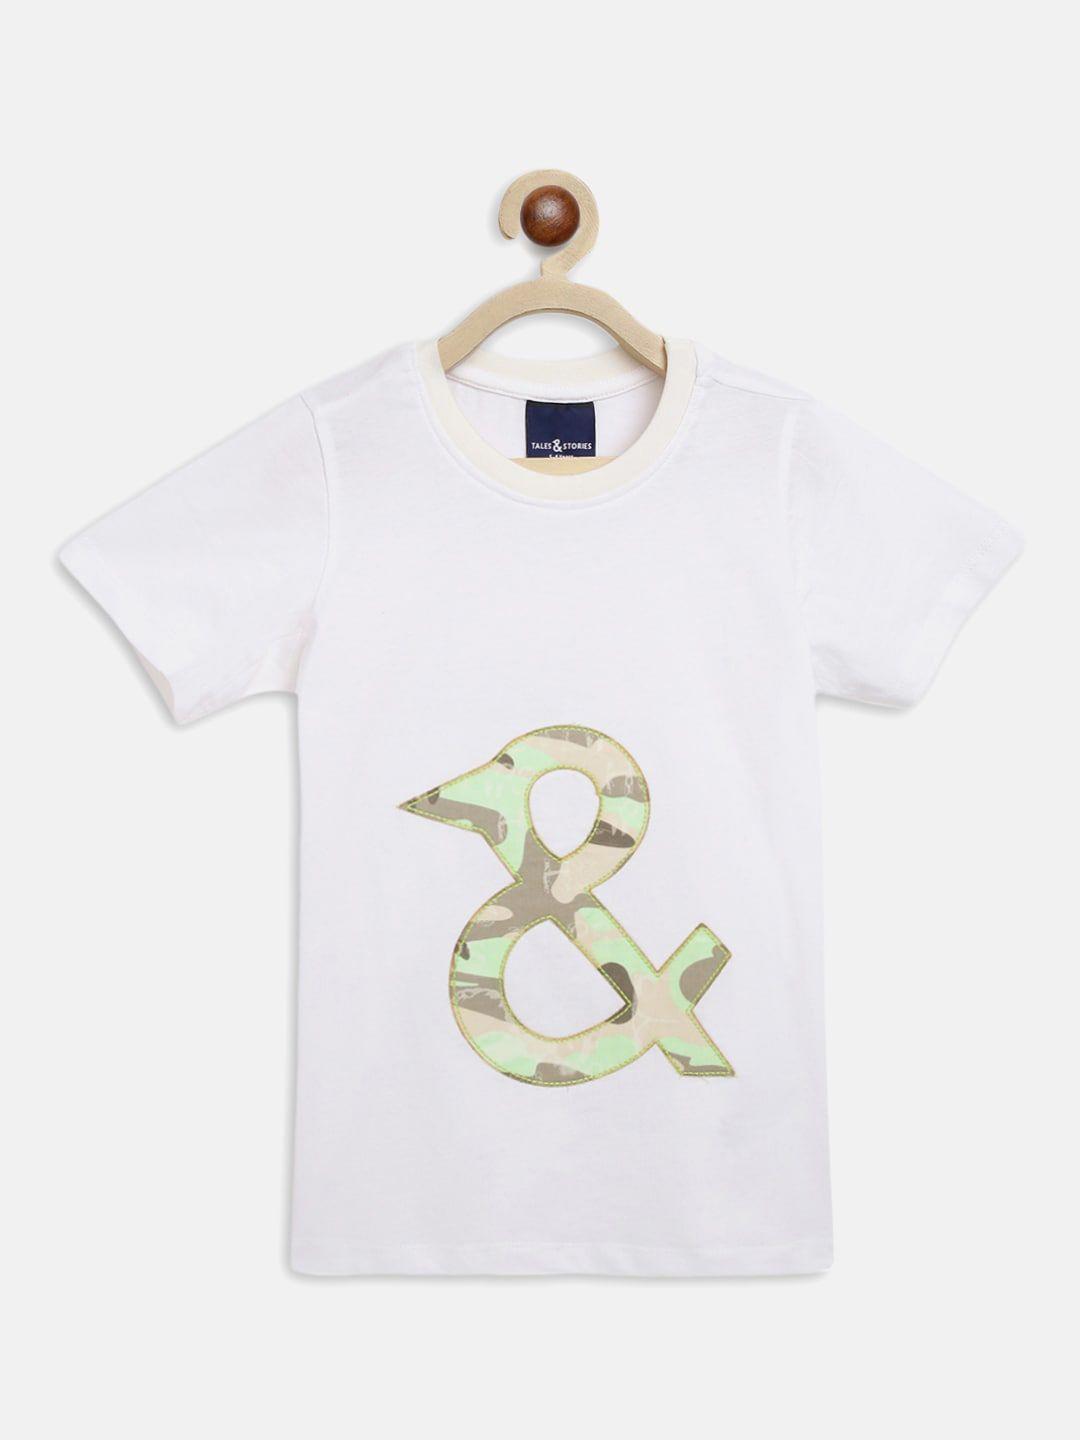 TALES & STORIES Boys Graphic Printed Cotton Casual T-shirt